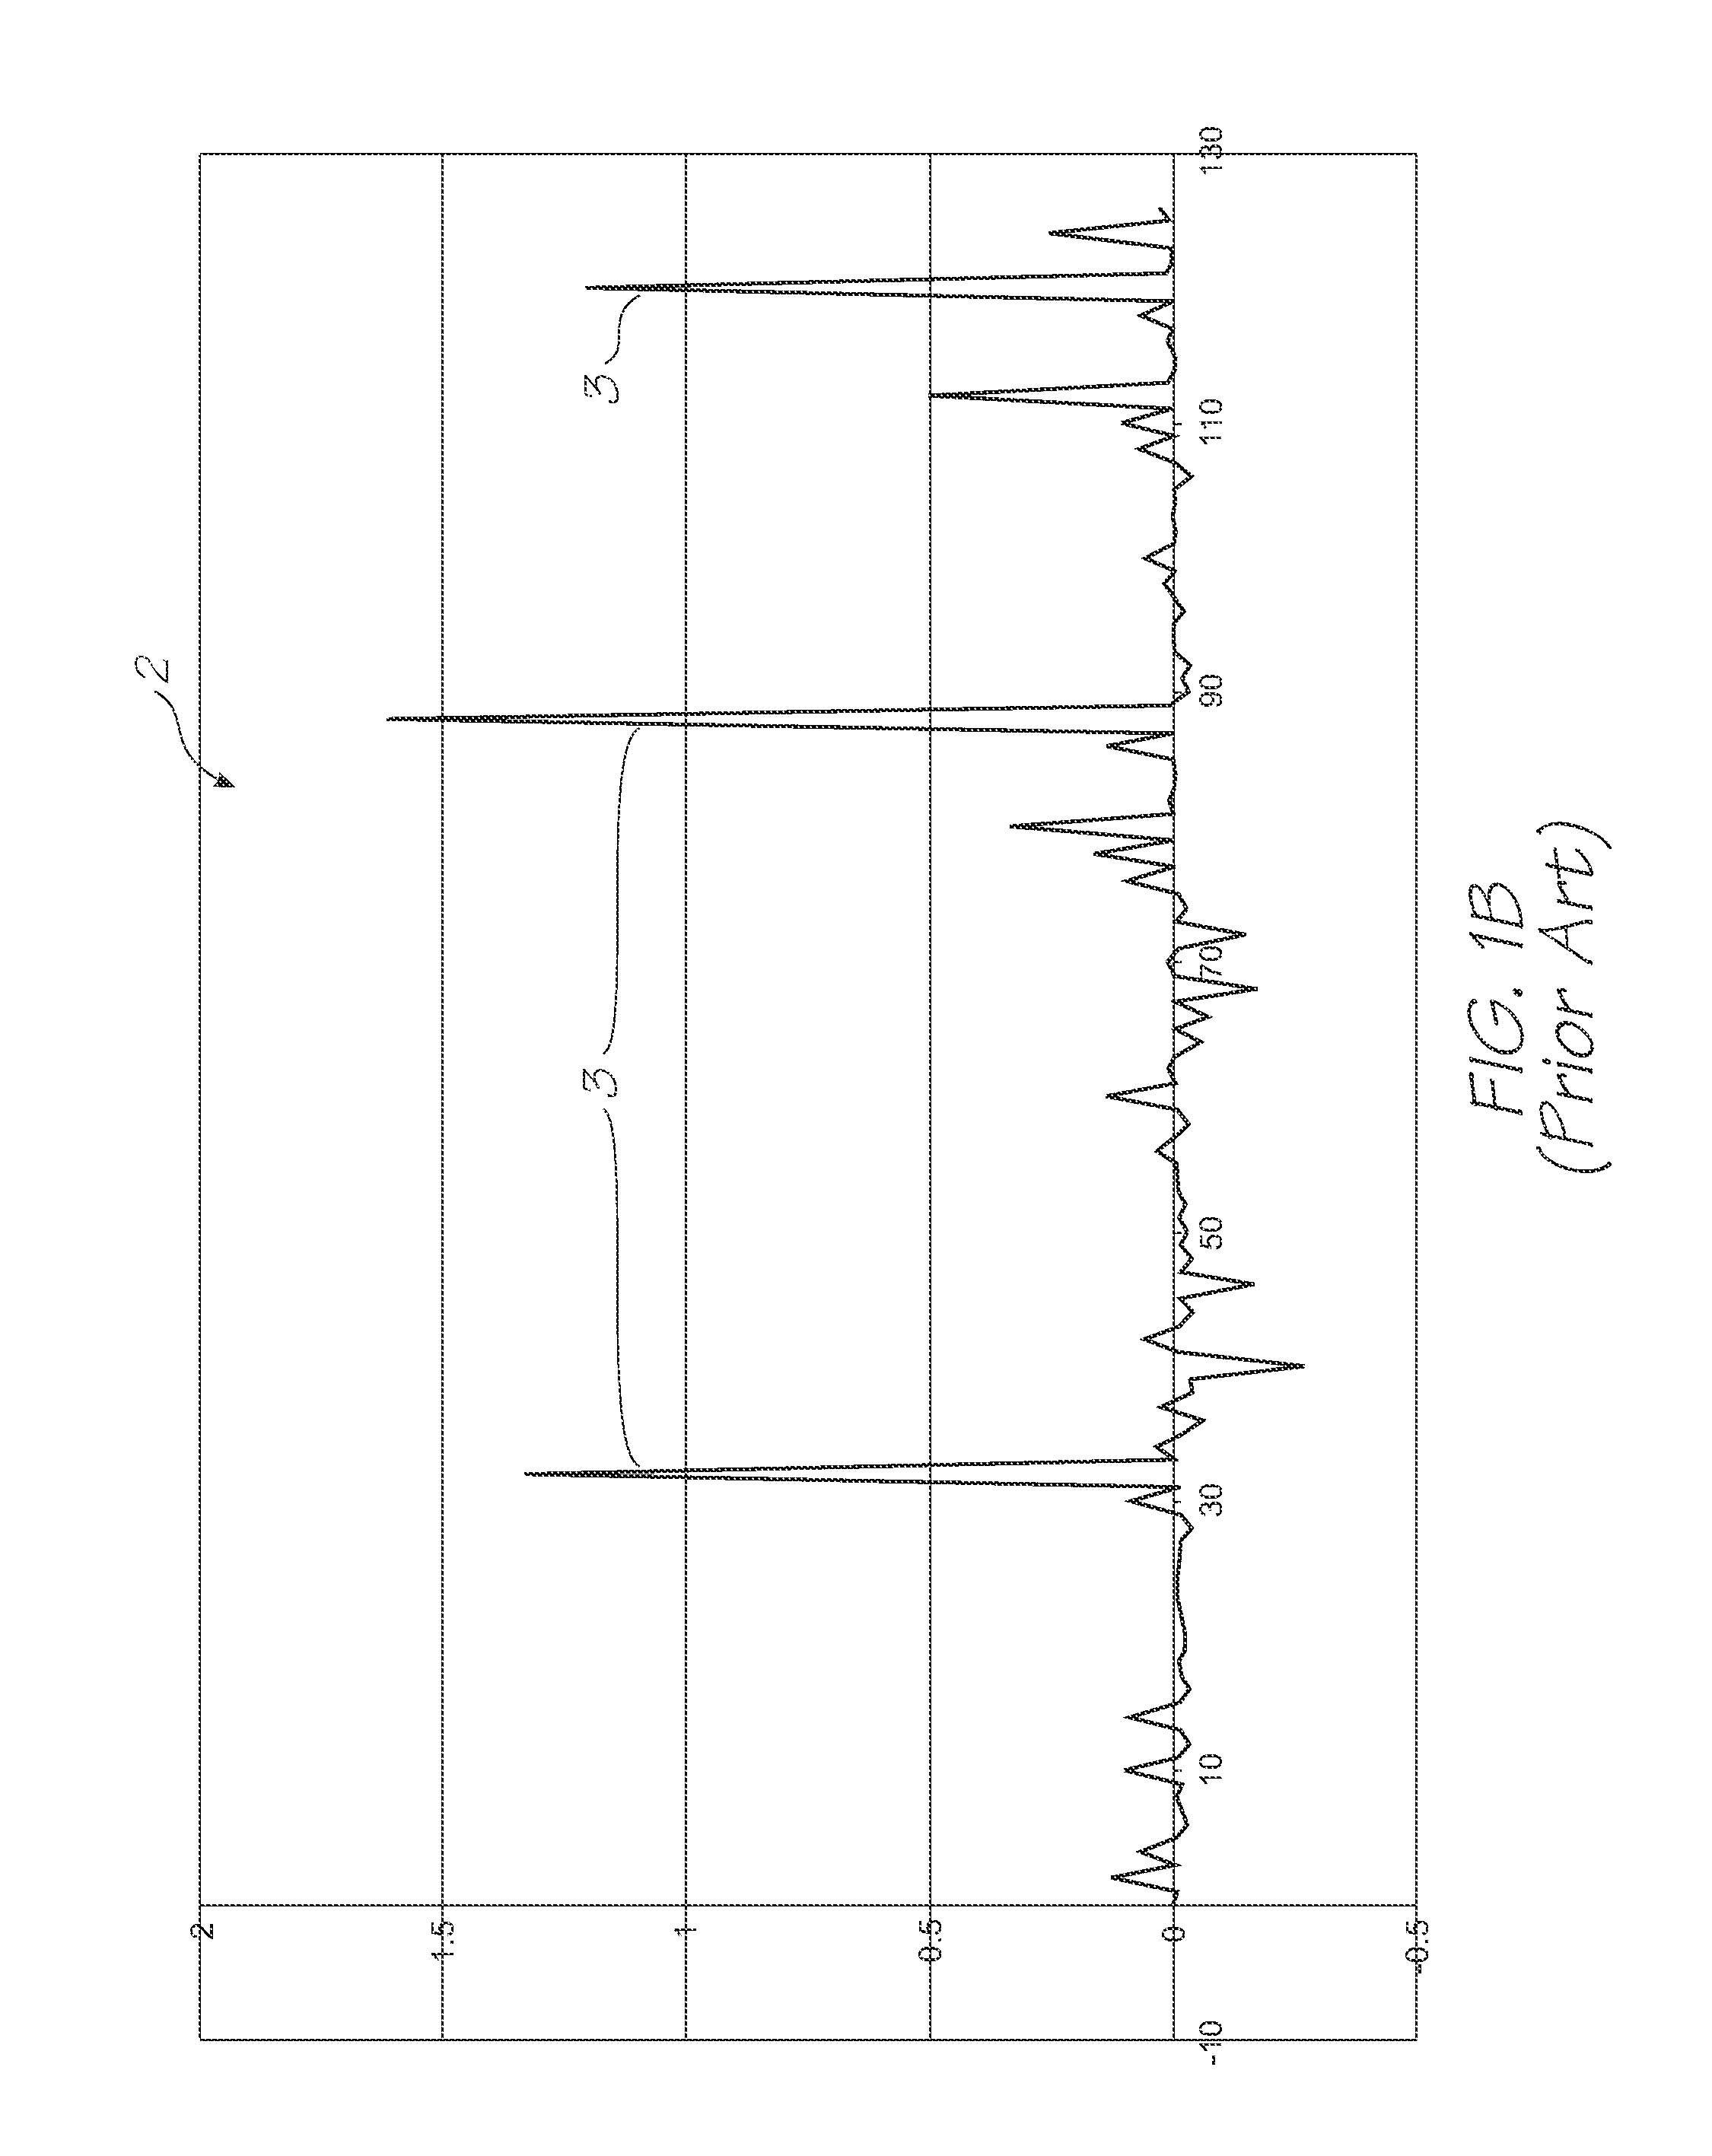 Encrypted Communication System with Limited Number of Stored Encryption Key Retrievals